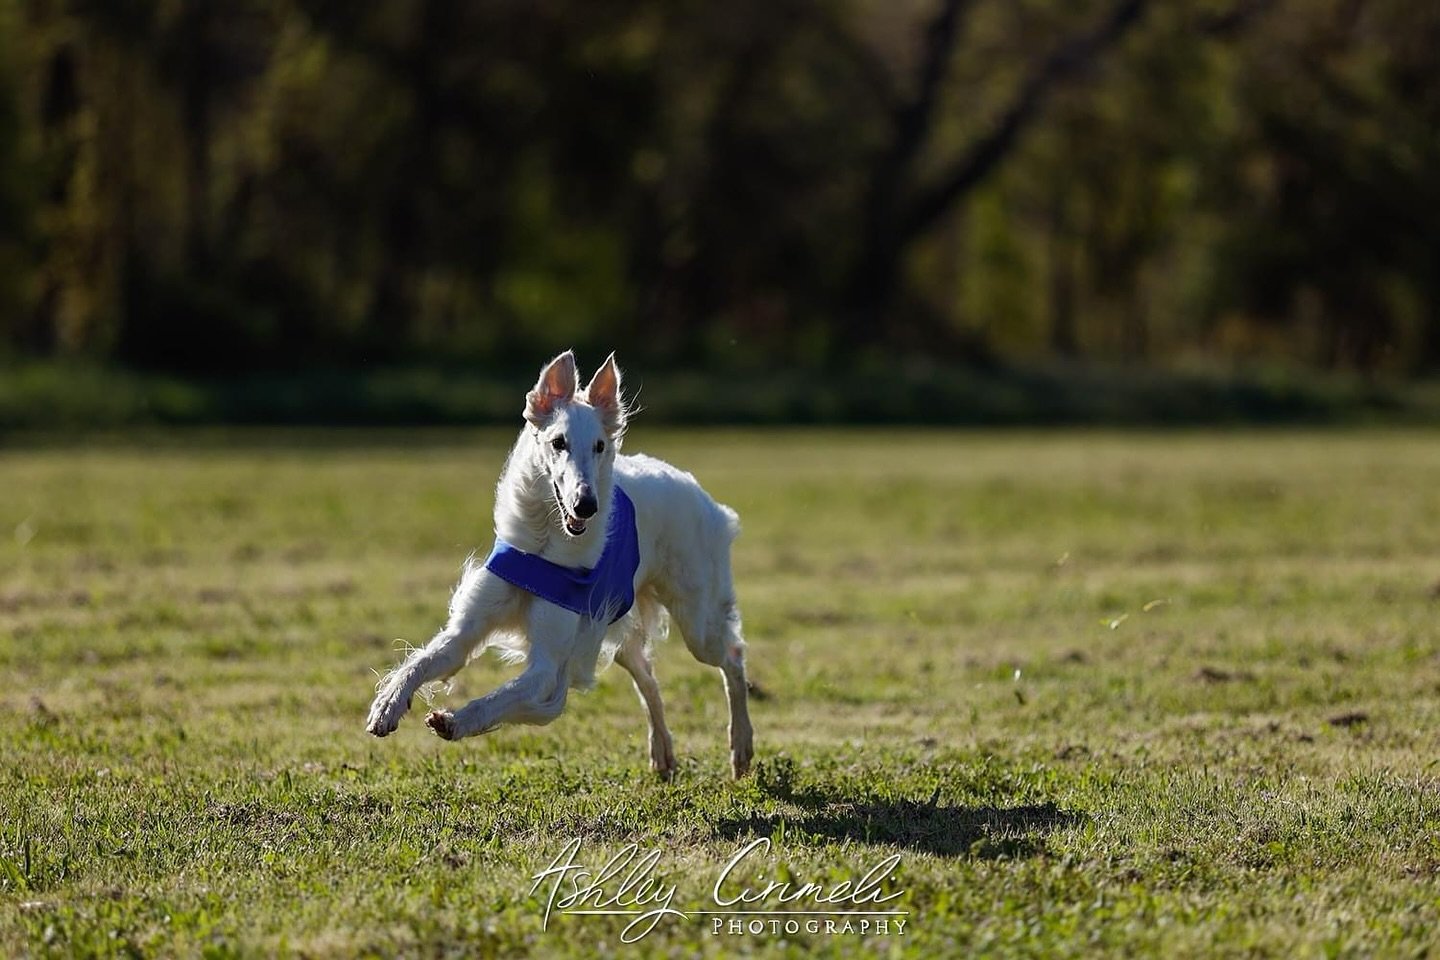 Zsa Zsa finishing up her QC run with ears flying high! 🐰

It was a loooong day yesterday and I think we&rsquo;re all still tired. I feel like crud and my voice is struggling 😅. But the dogs had a really wonderful time running, the weather was very 